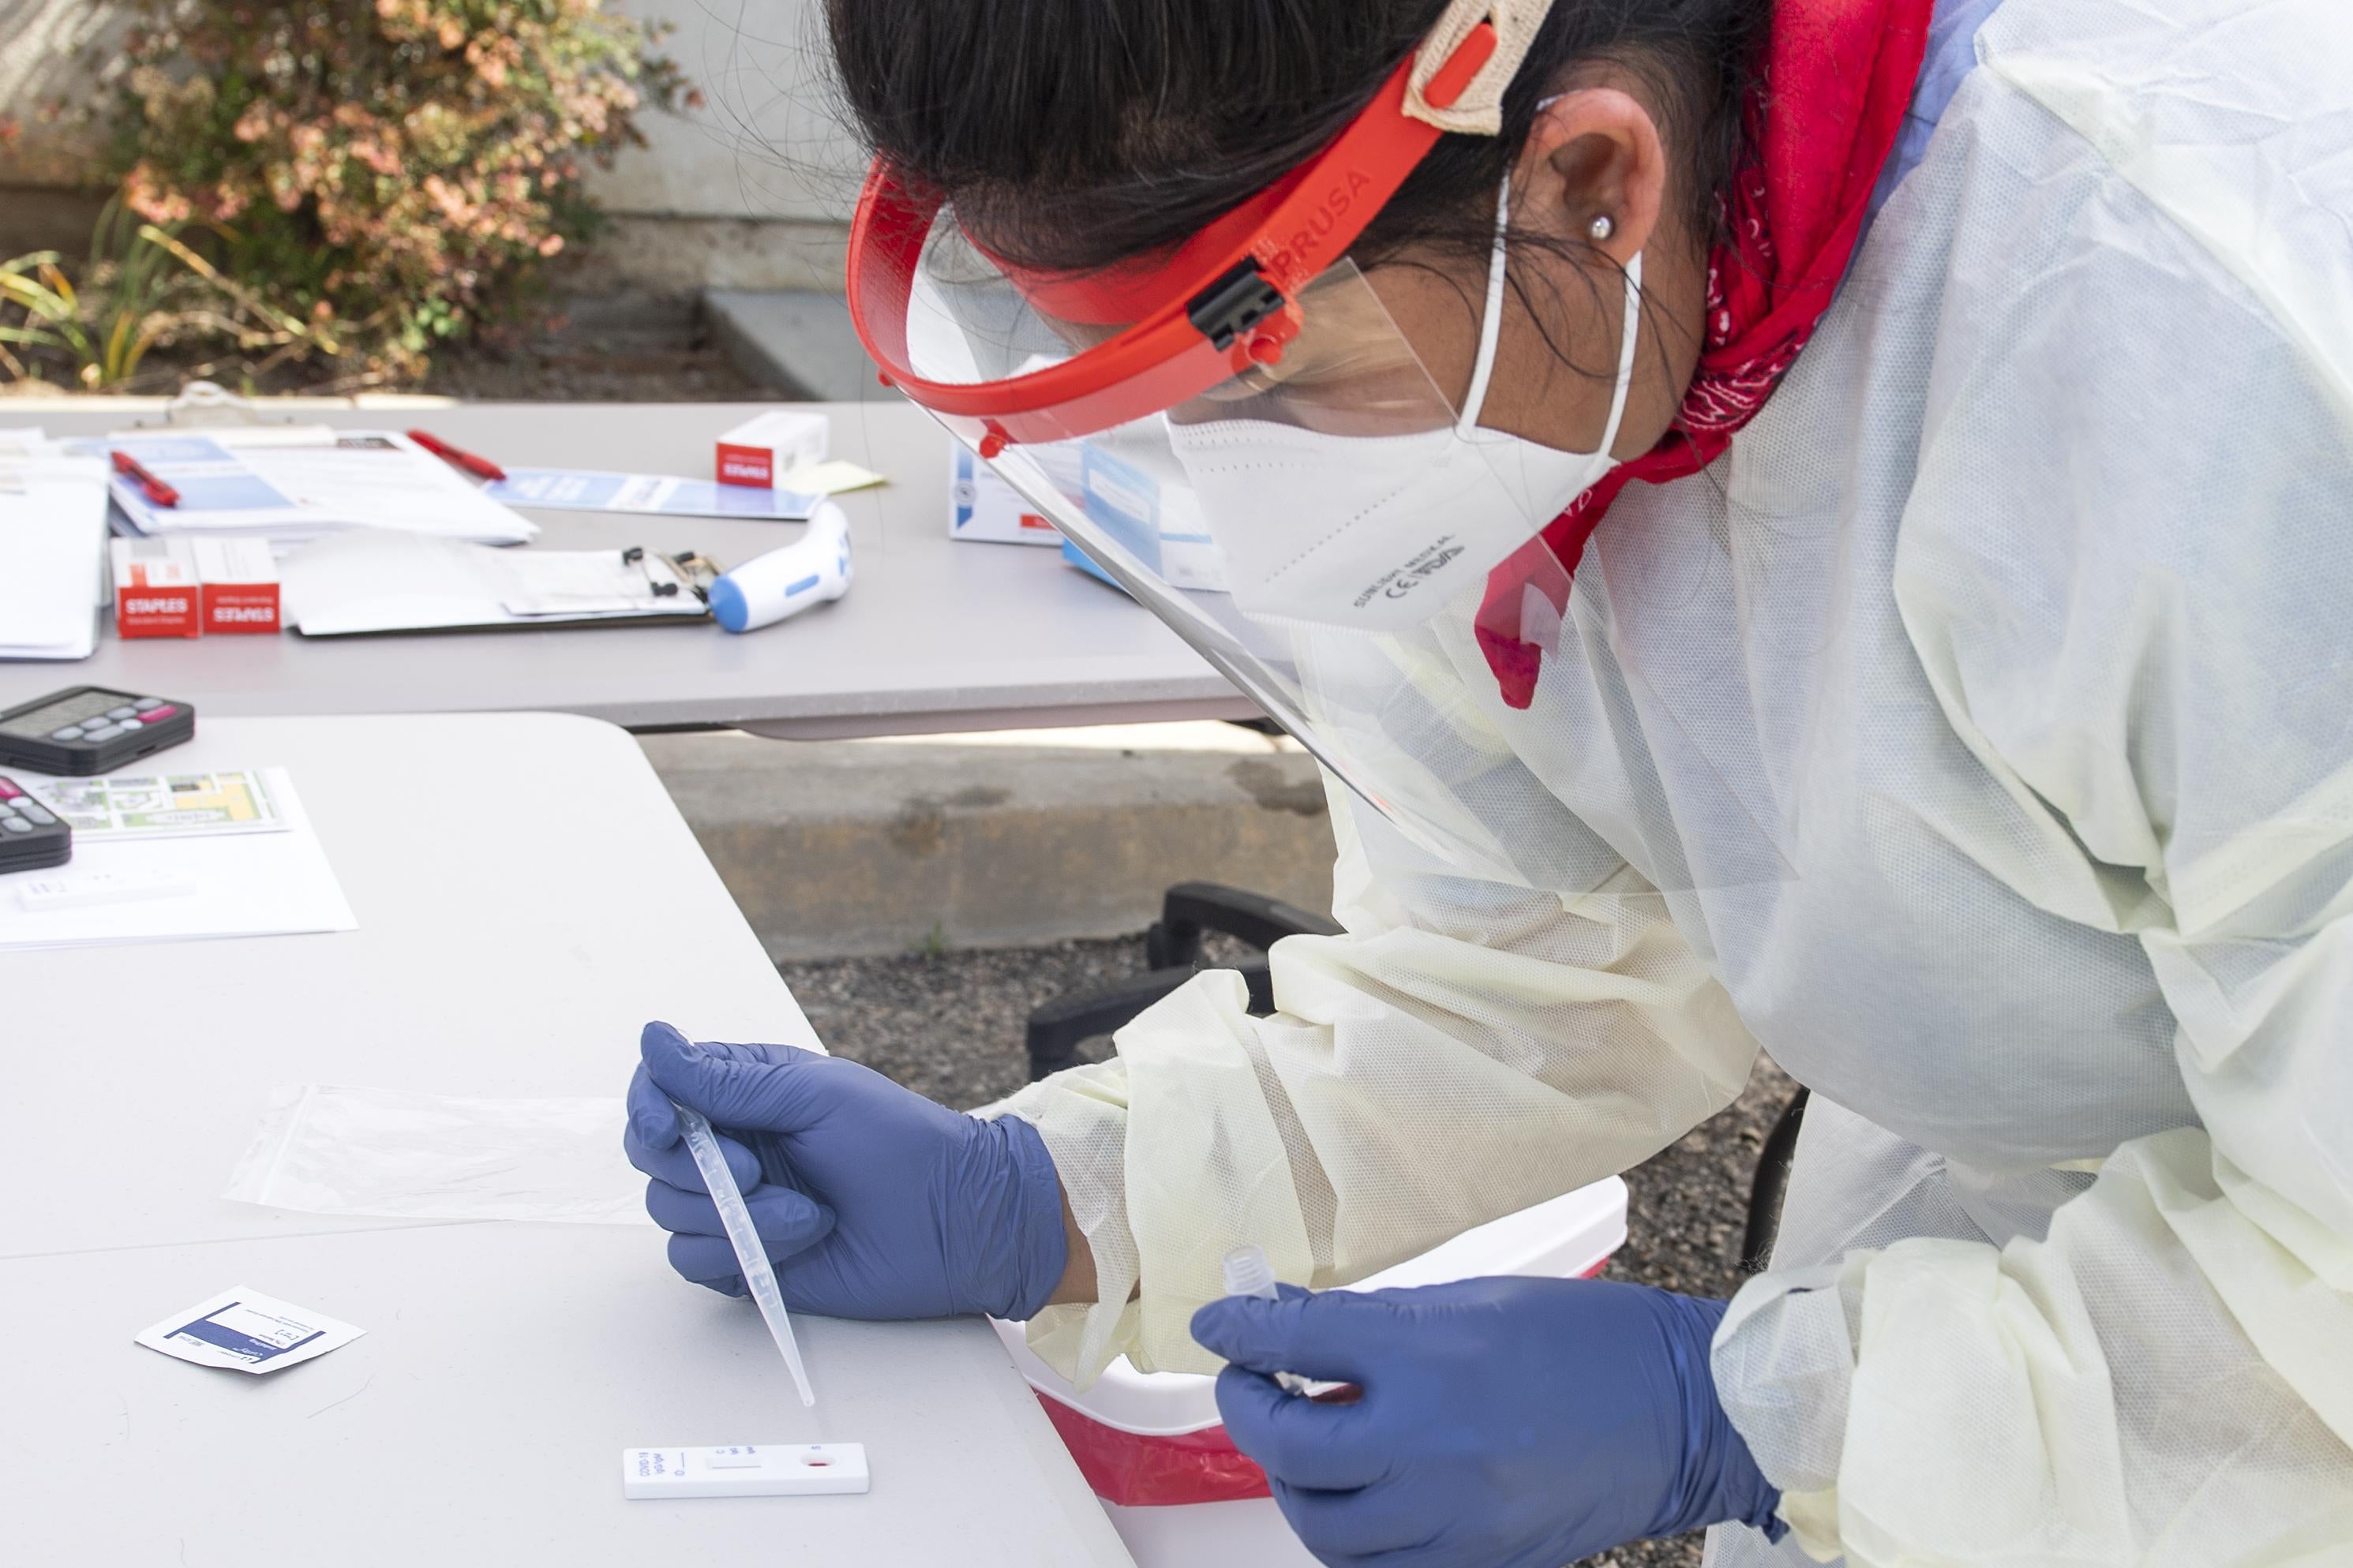 A woman in protective clothing leans over an antibody test on a table under a tent.